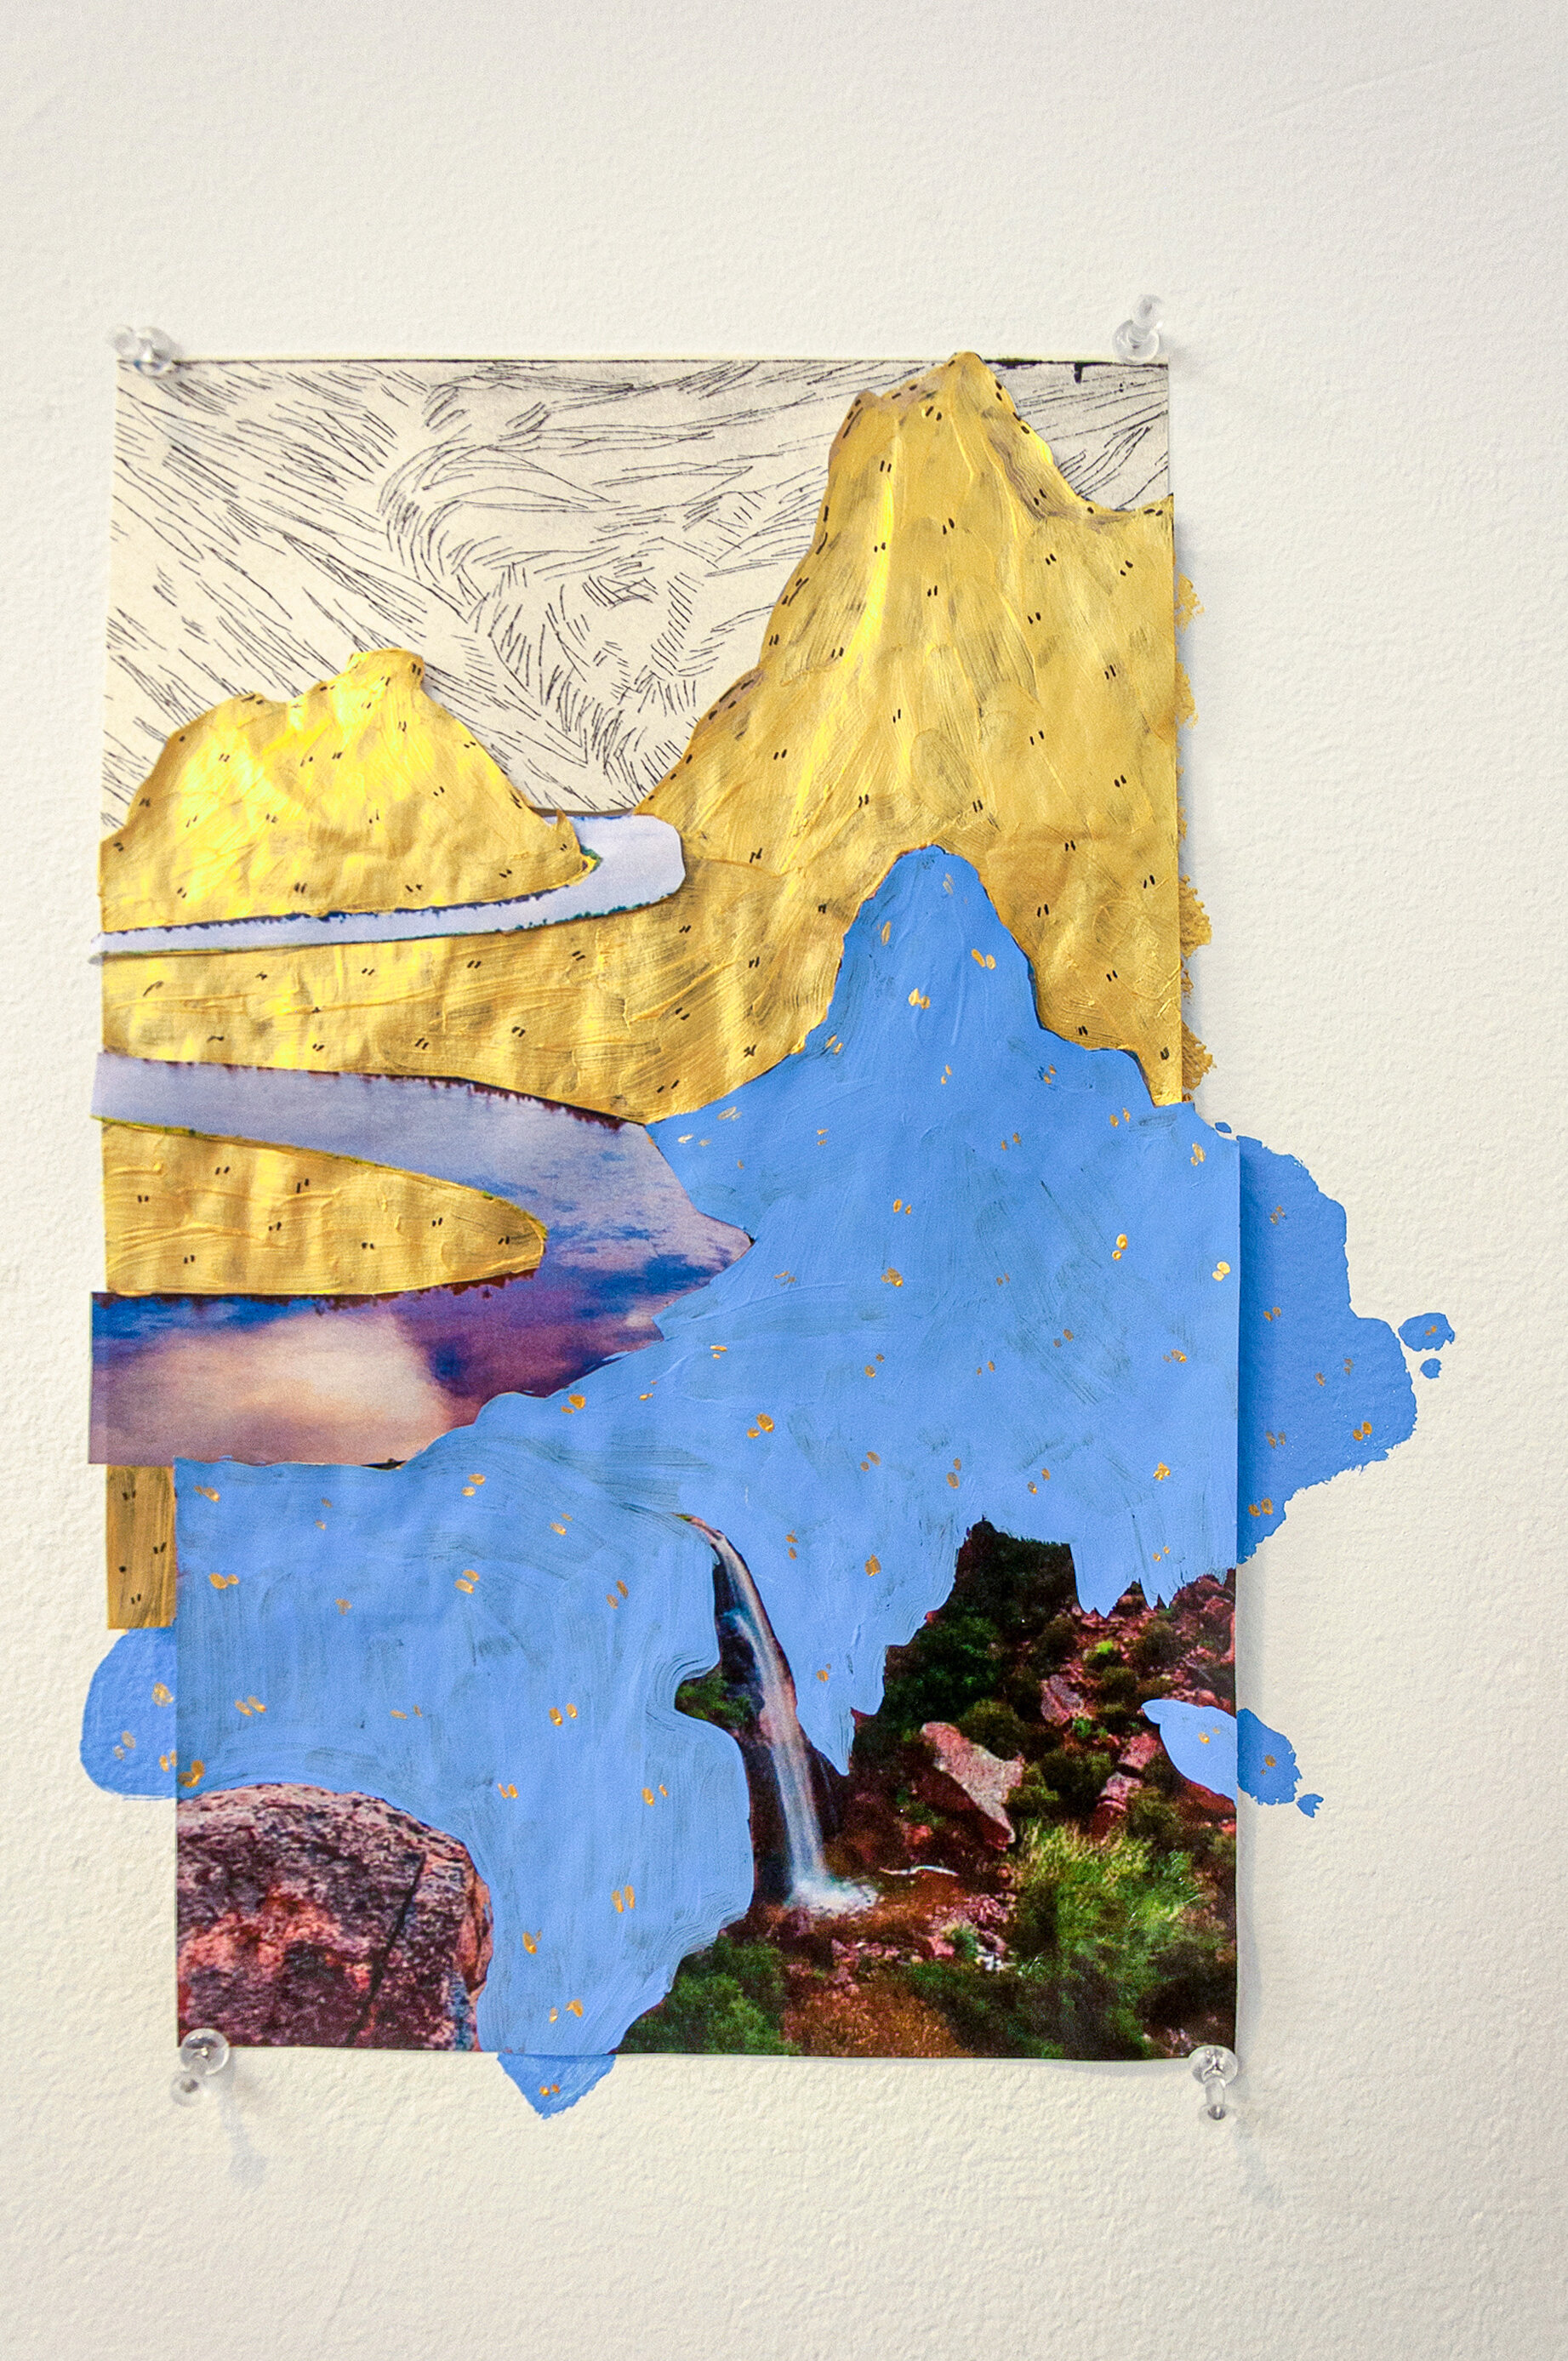 Golden and blue mountains, acrylic on paper, photo collage, etching, 11.69 x 8.27 in, 2017